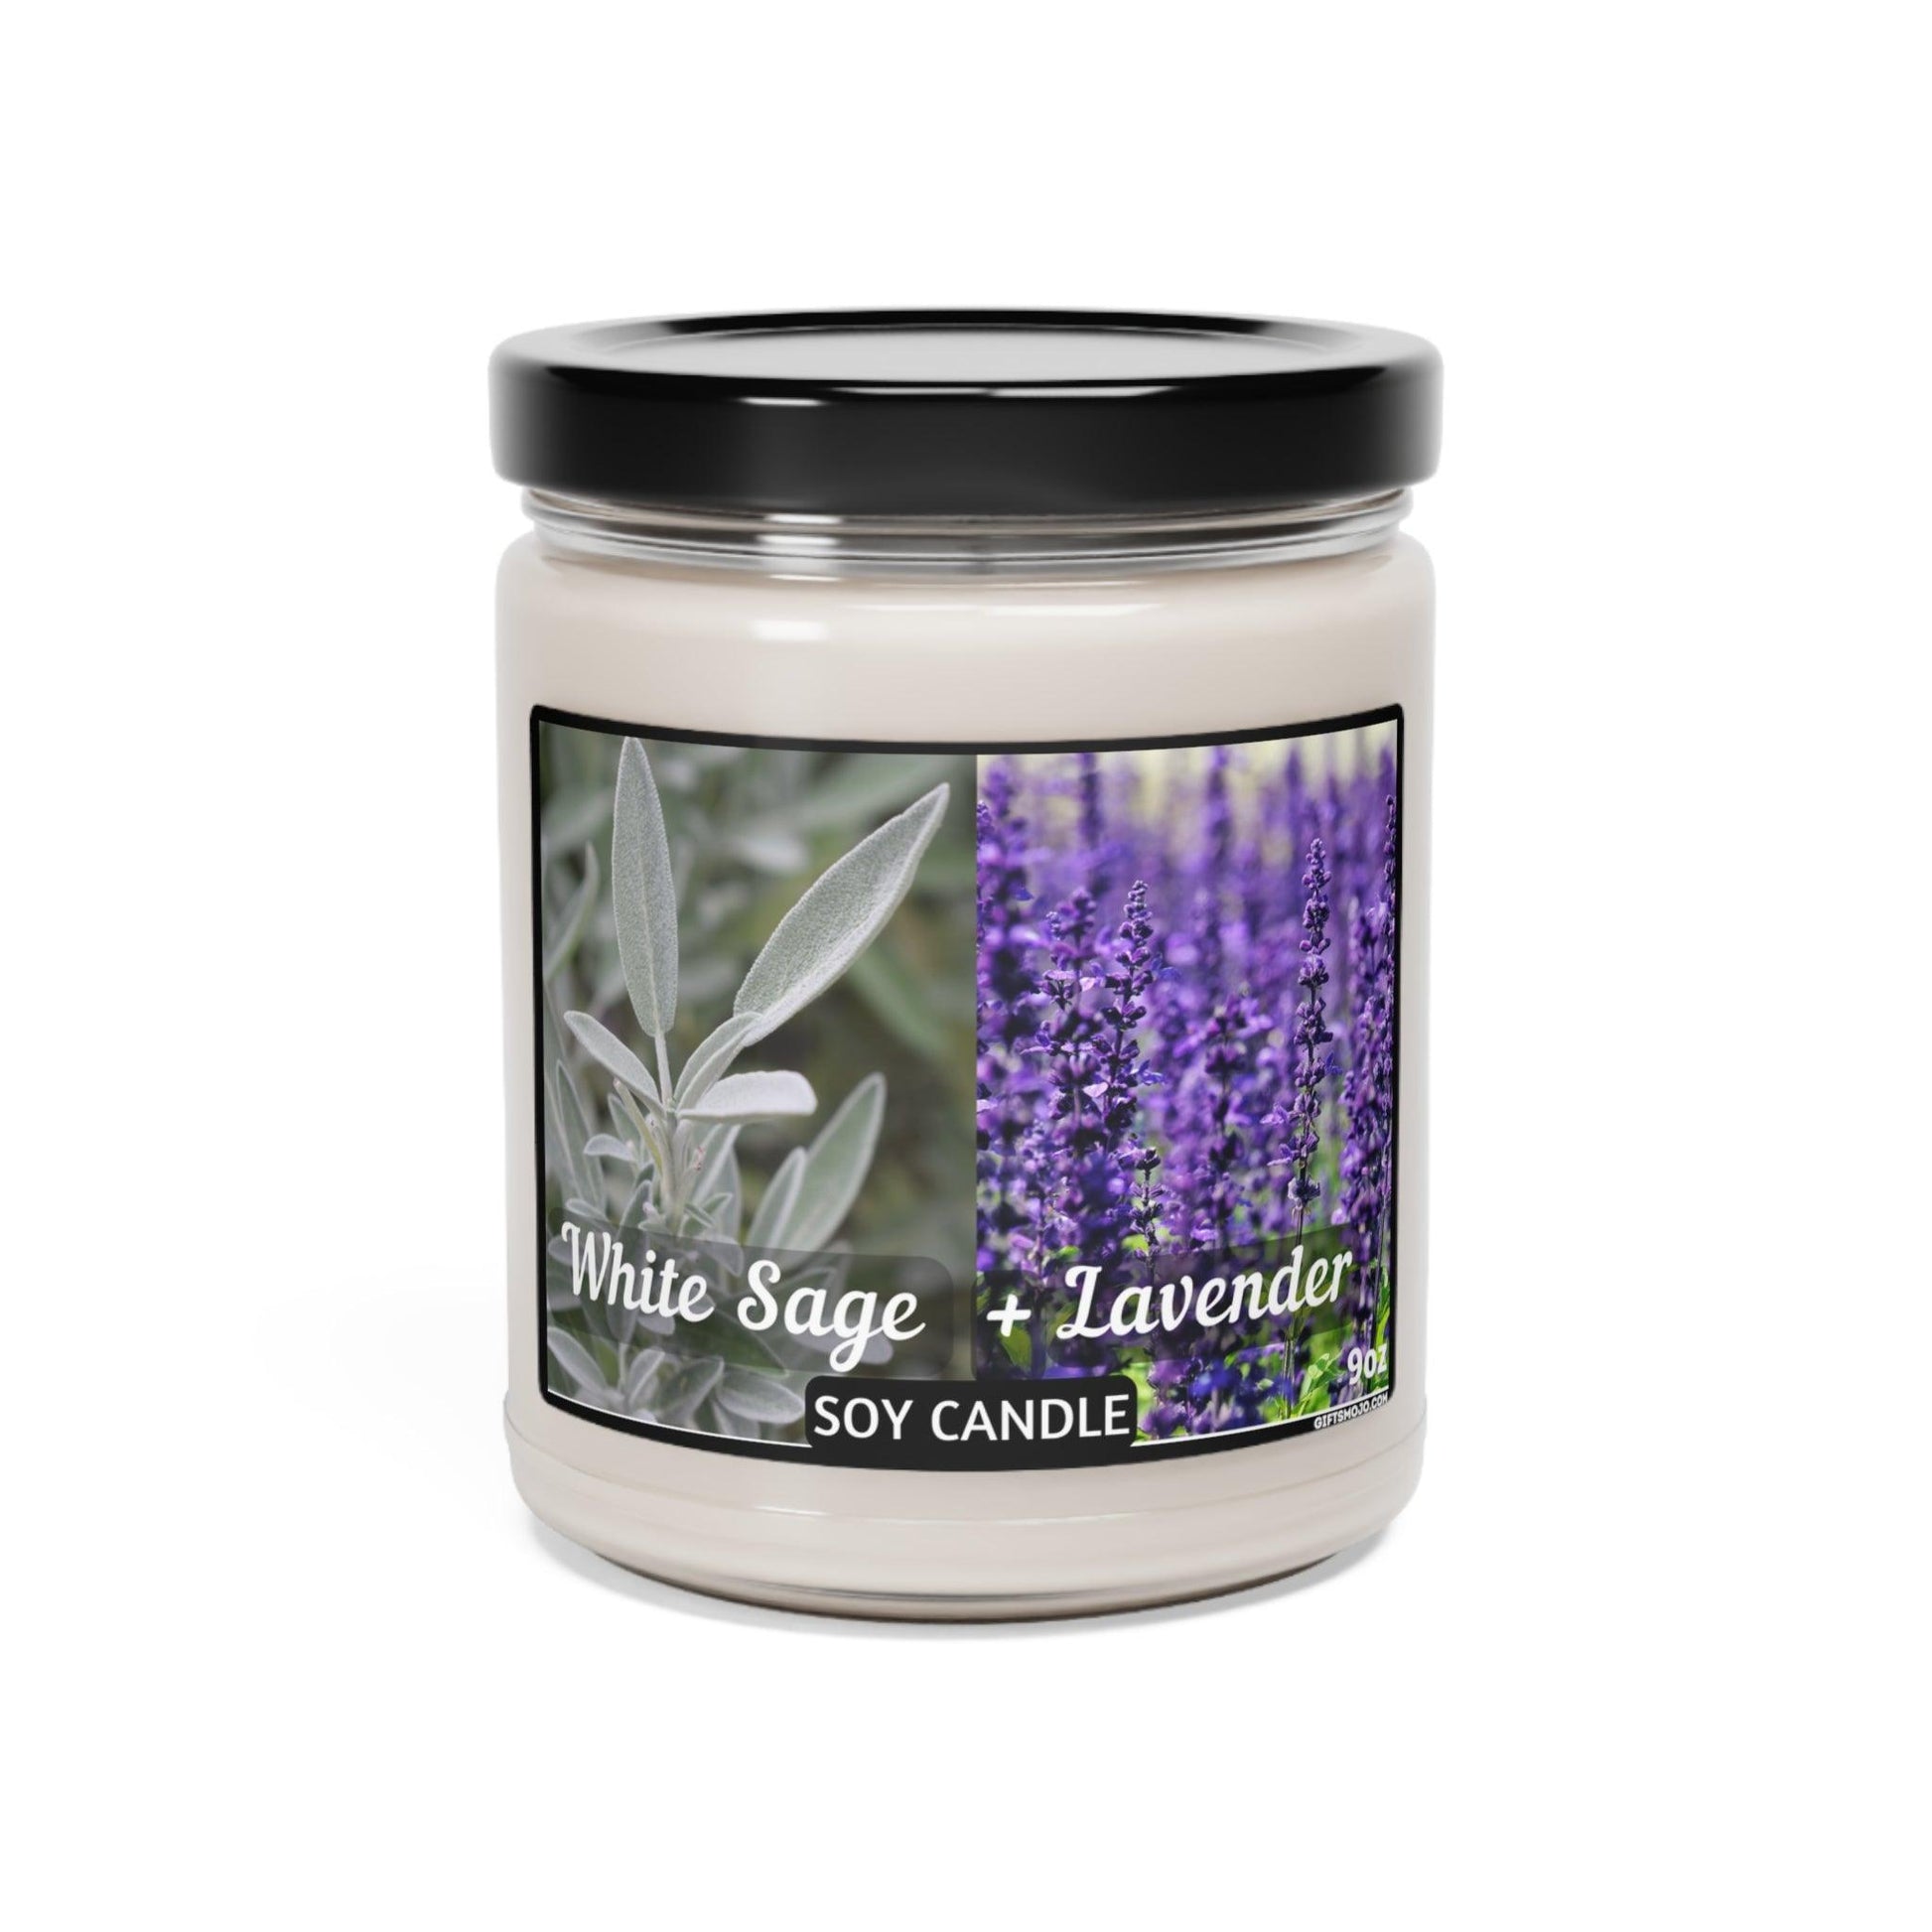 Scented Soy Candle, Apple Harvest, Cinnamon Vanilla, Clean Cotton, Sea Salt Orchid, White Sage Lavender, 9oz, - Giftsmojo